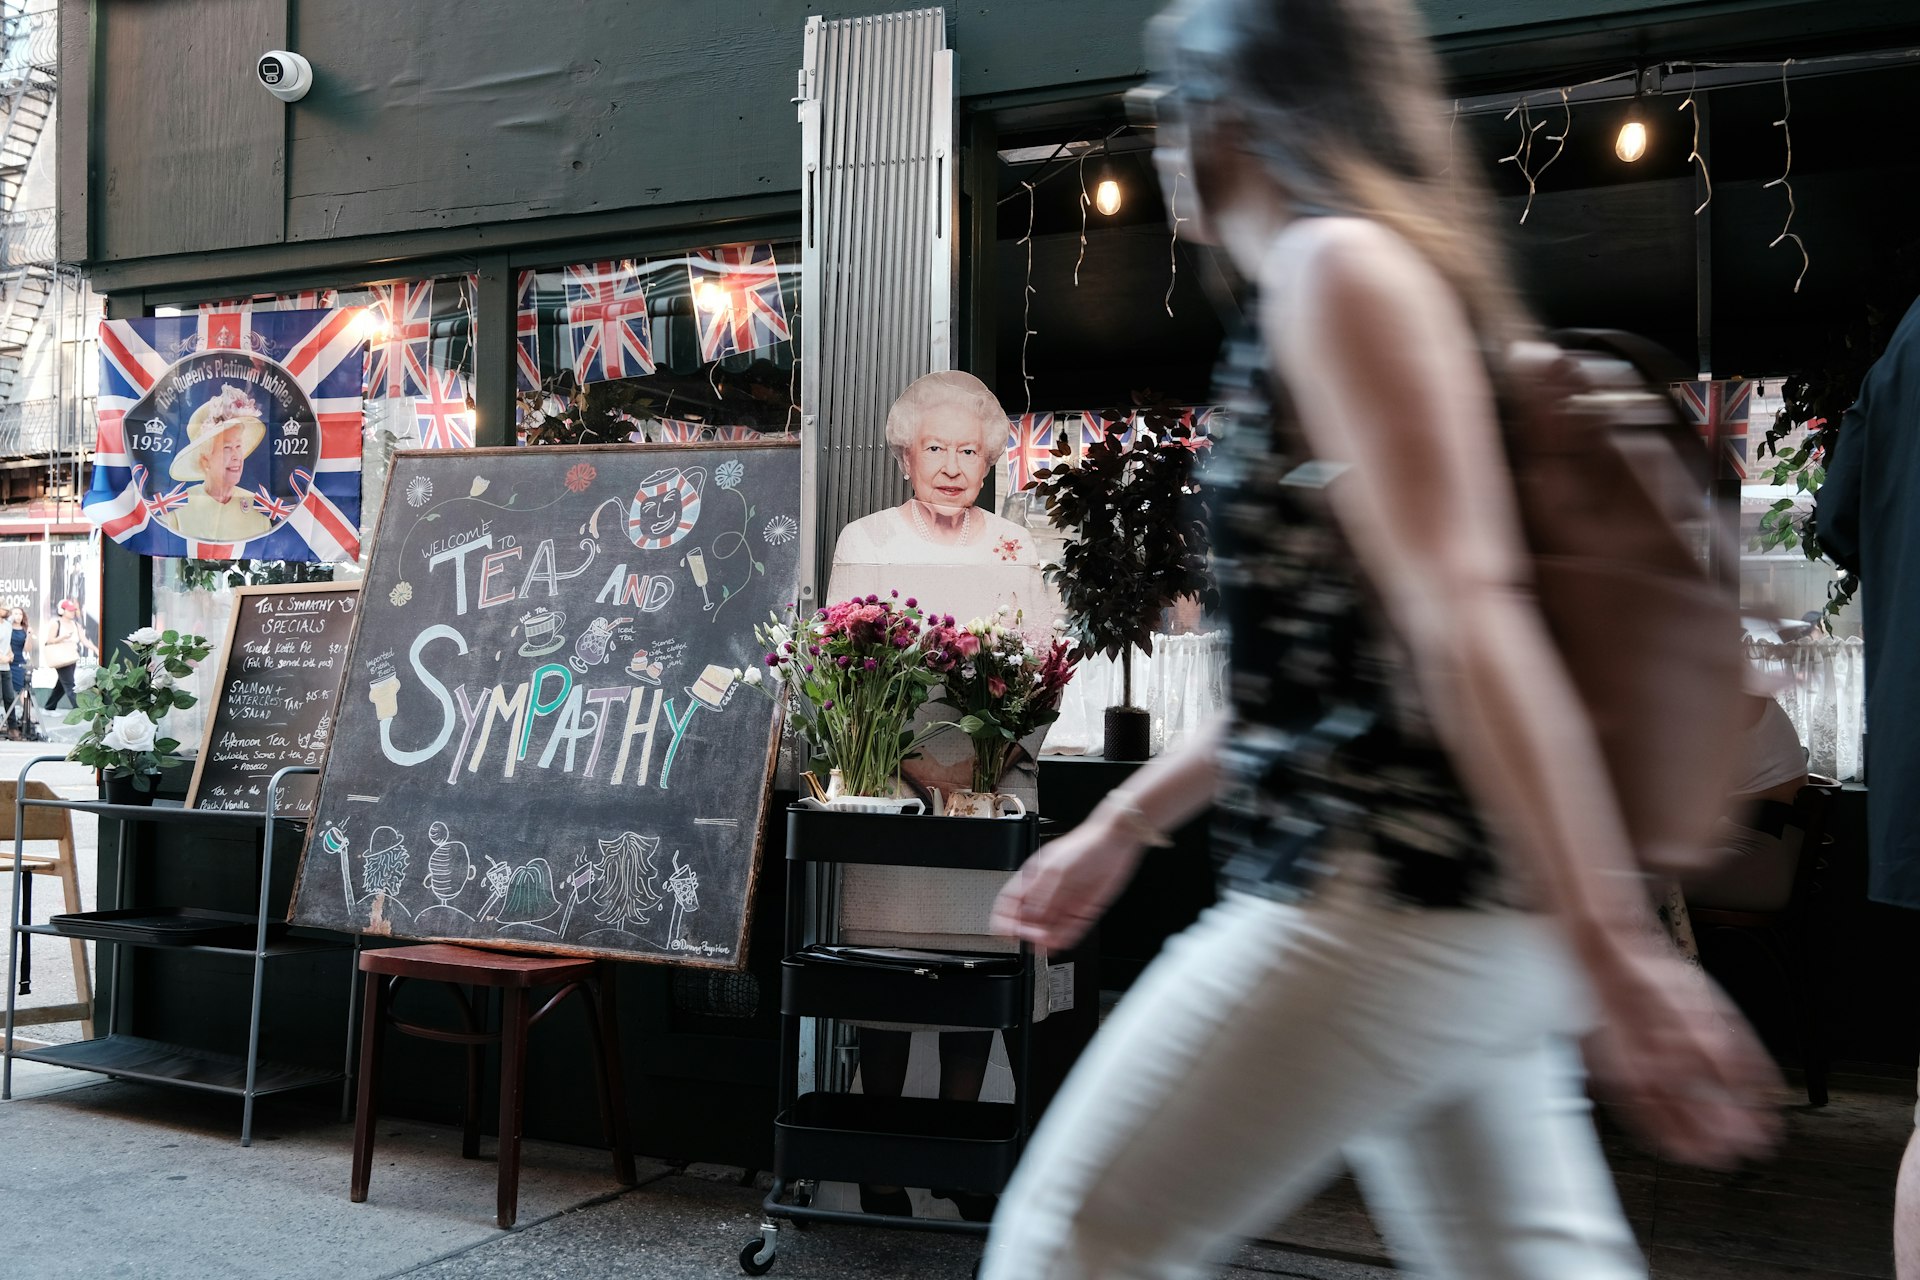 Displays of the late Queen Elizabeth are assembled outside of Tea & Sympathy, West Village, New York City, New York, USA